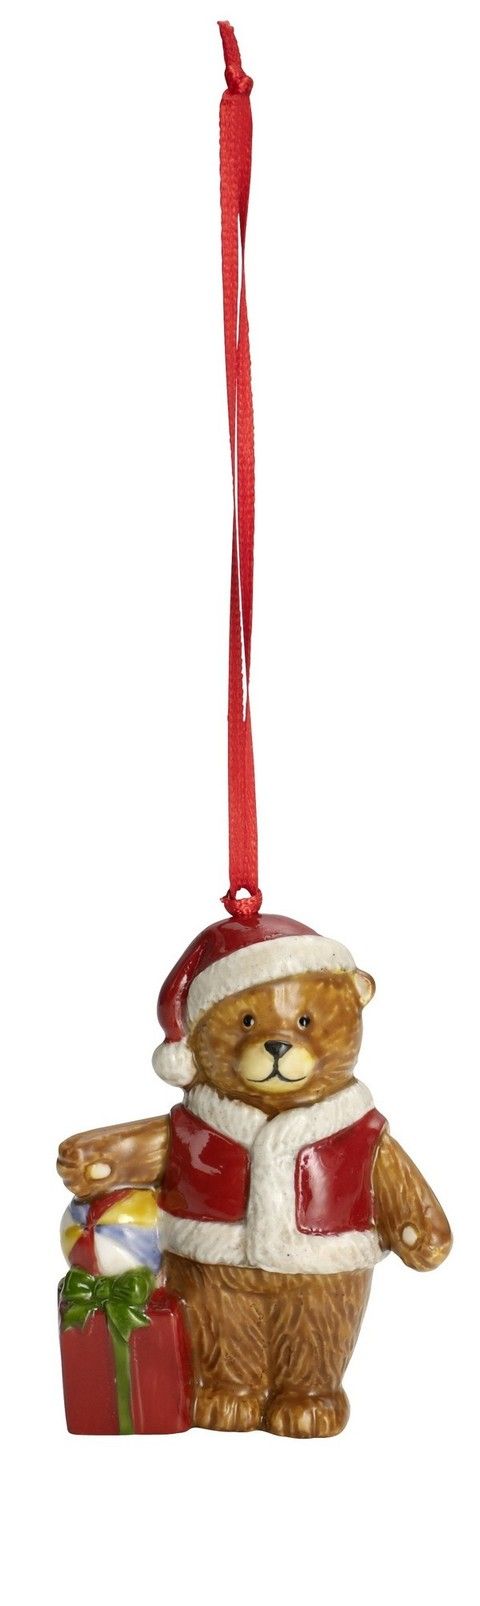 Red, Teddy bear, Costume accessory, Carmine, Toy, Maroon, Bear, Coquelicot, Ornament, Holiday ornament, 